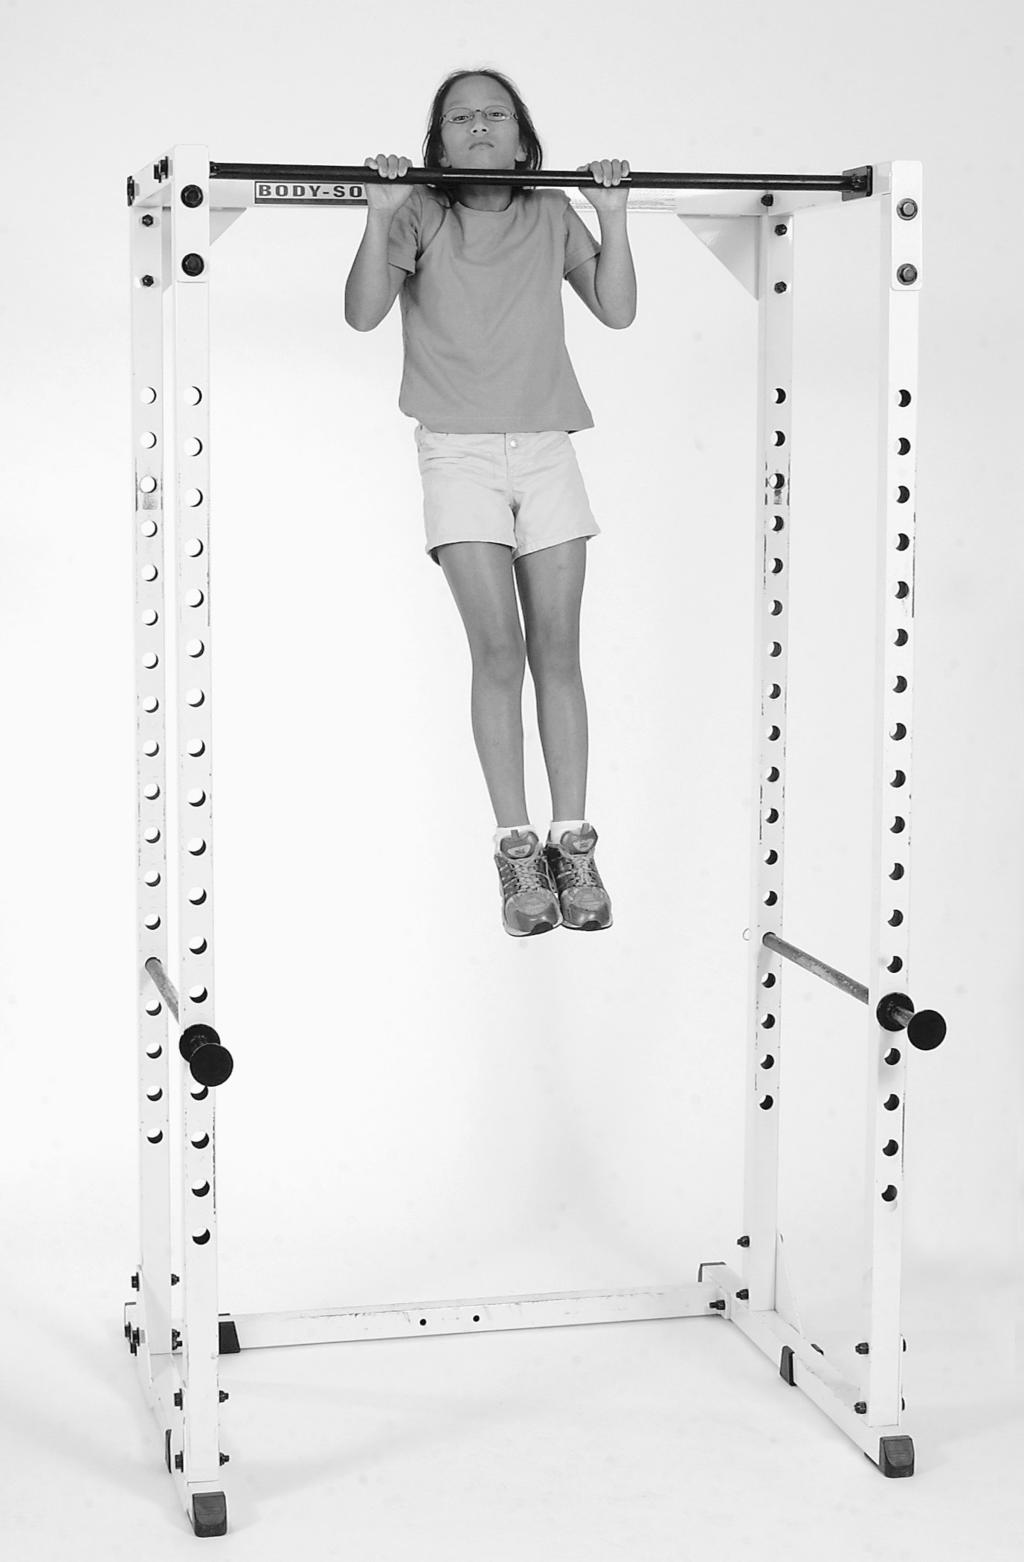 Shorter students may be lifted into the starting position. The student uses the arms to pull the body up until the chin is above the bar and then lowers the body again into the full hanging position.